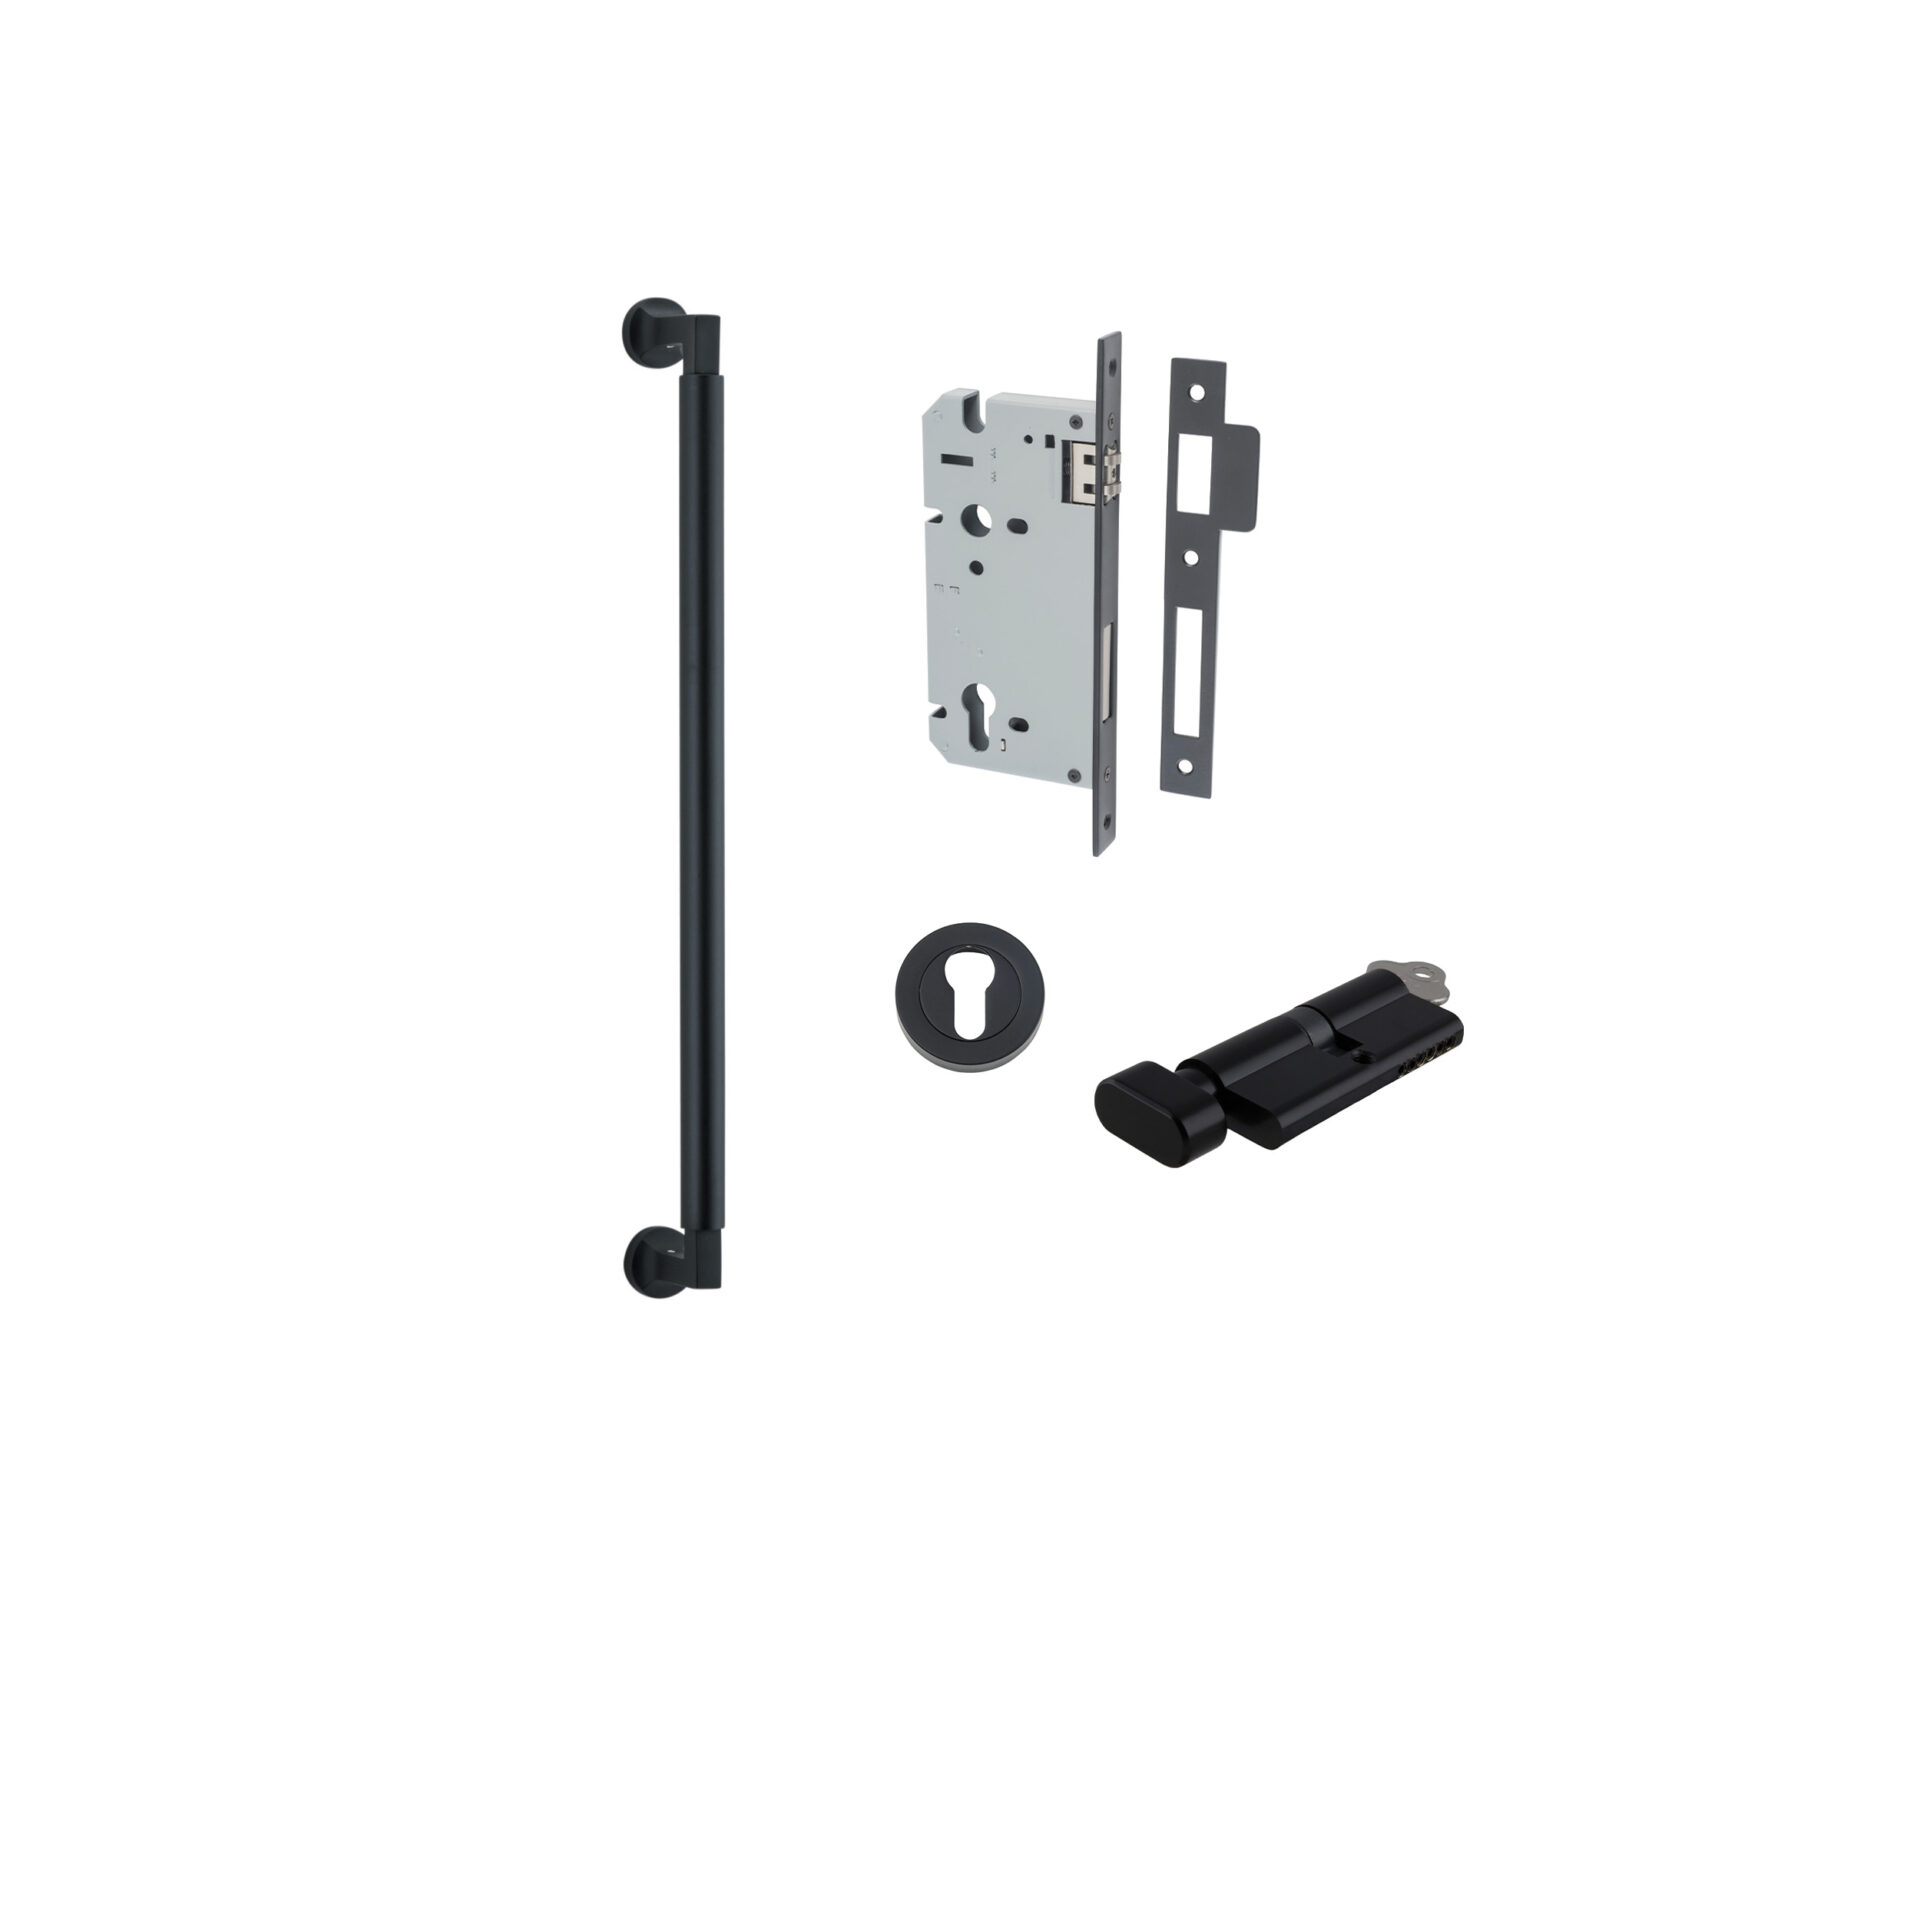 Berlin Pull Handle - 450mm Entrance Kit with Separate High Security Lock